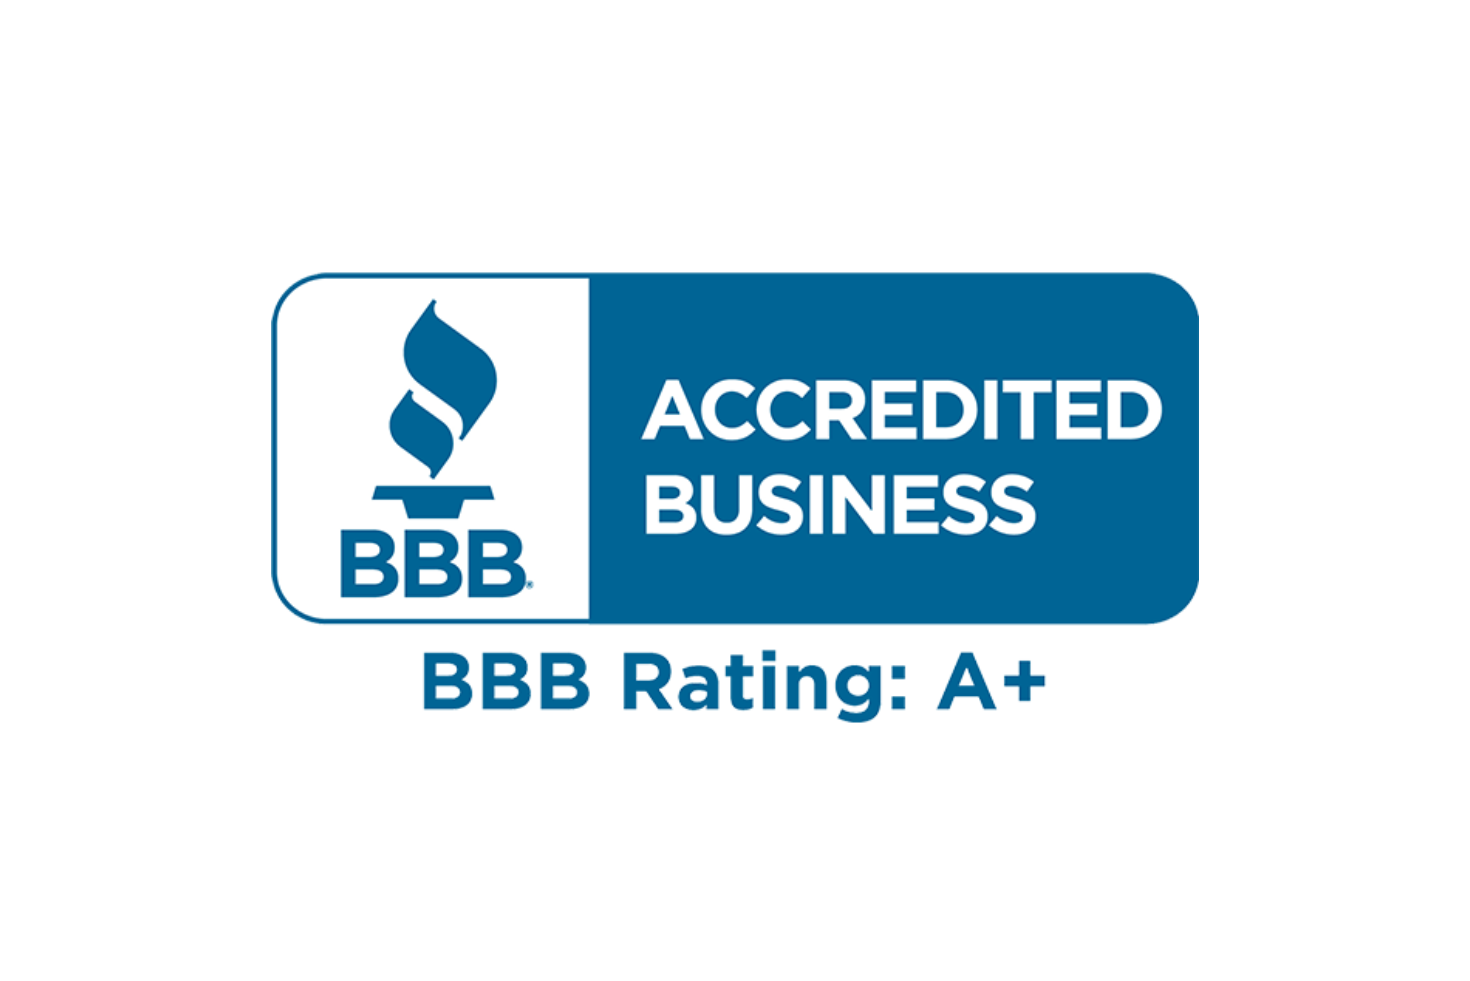 BBB Accredited Business BBB Rating: A+